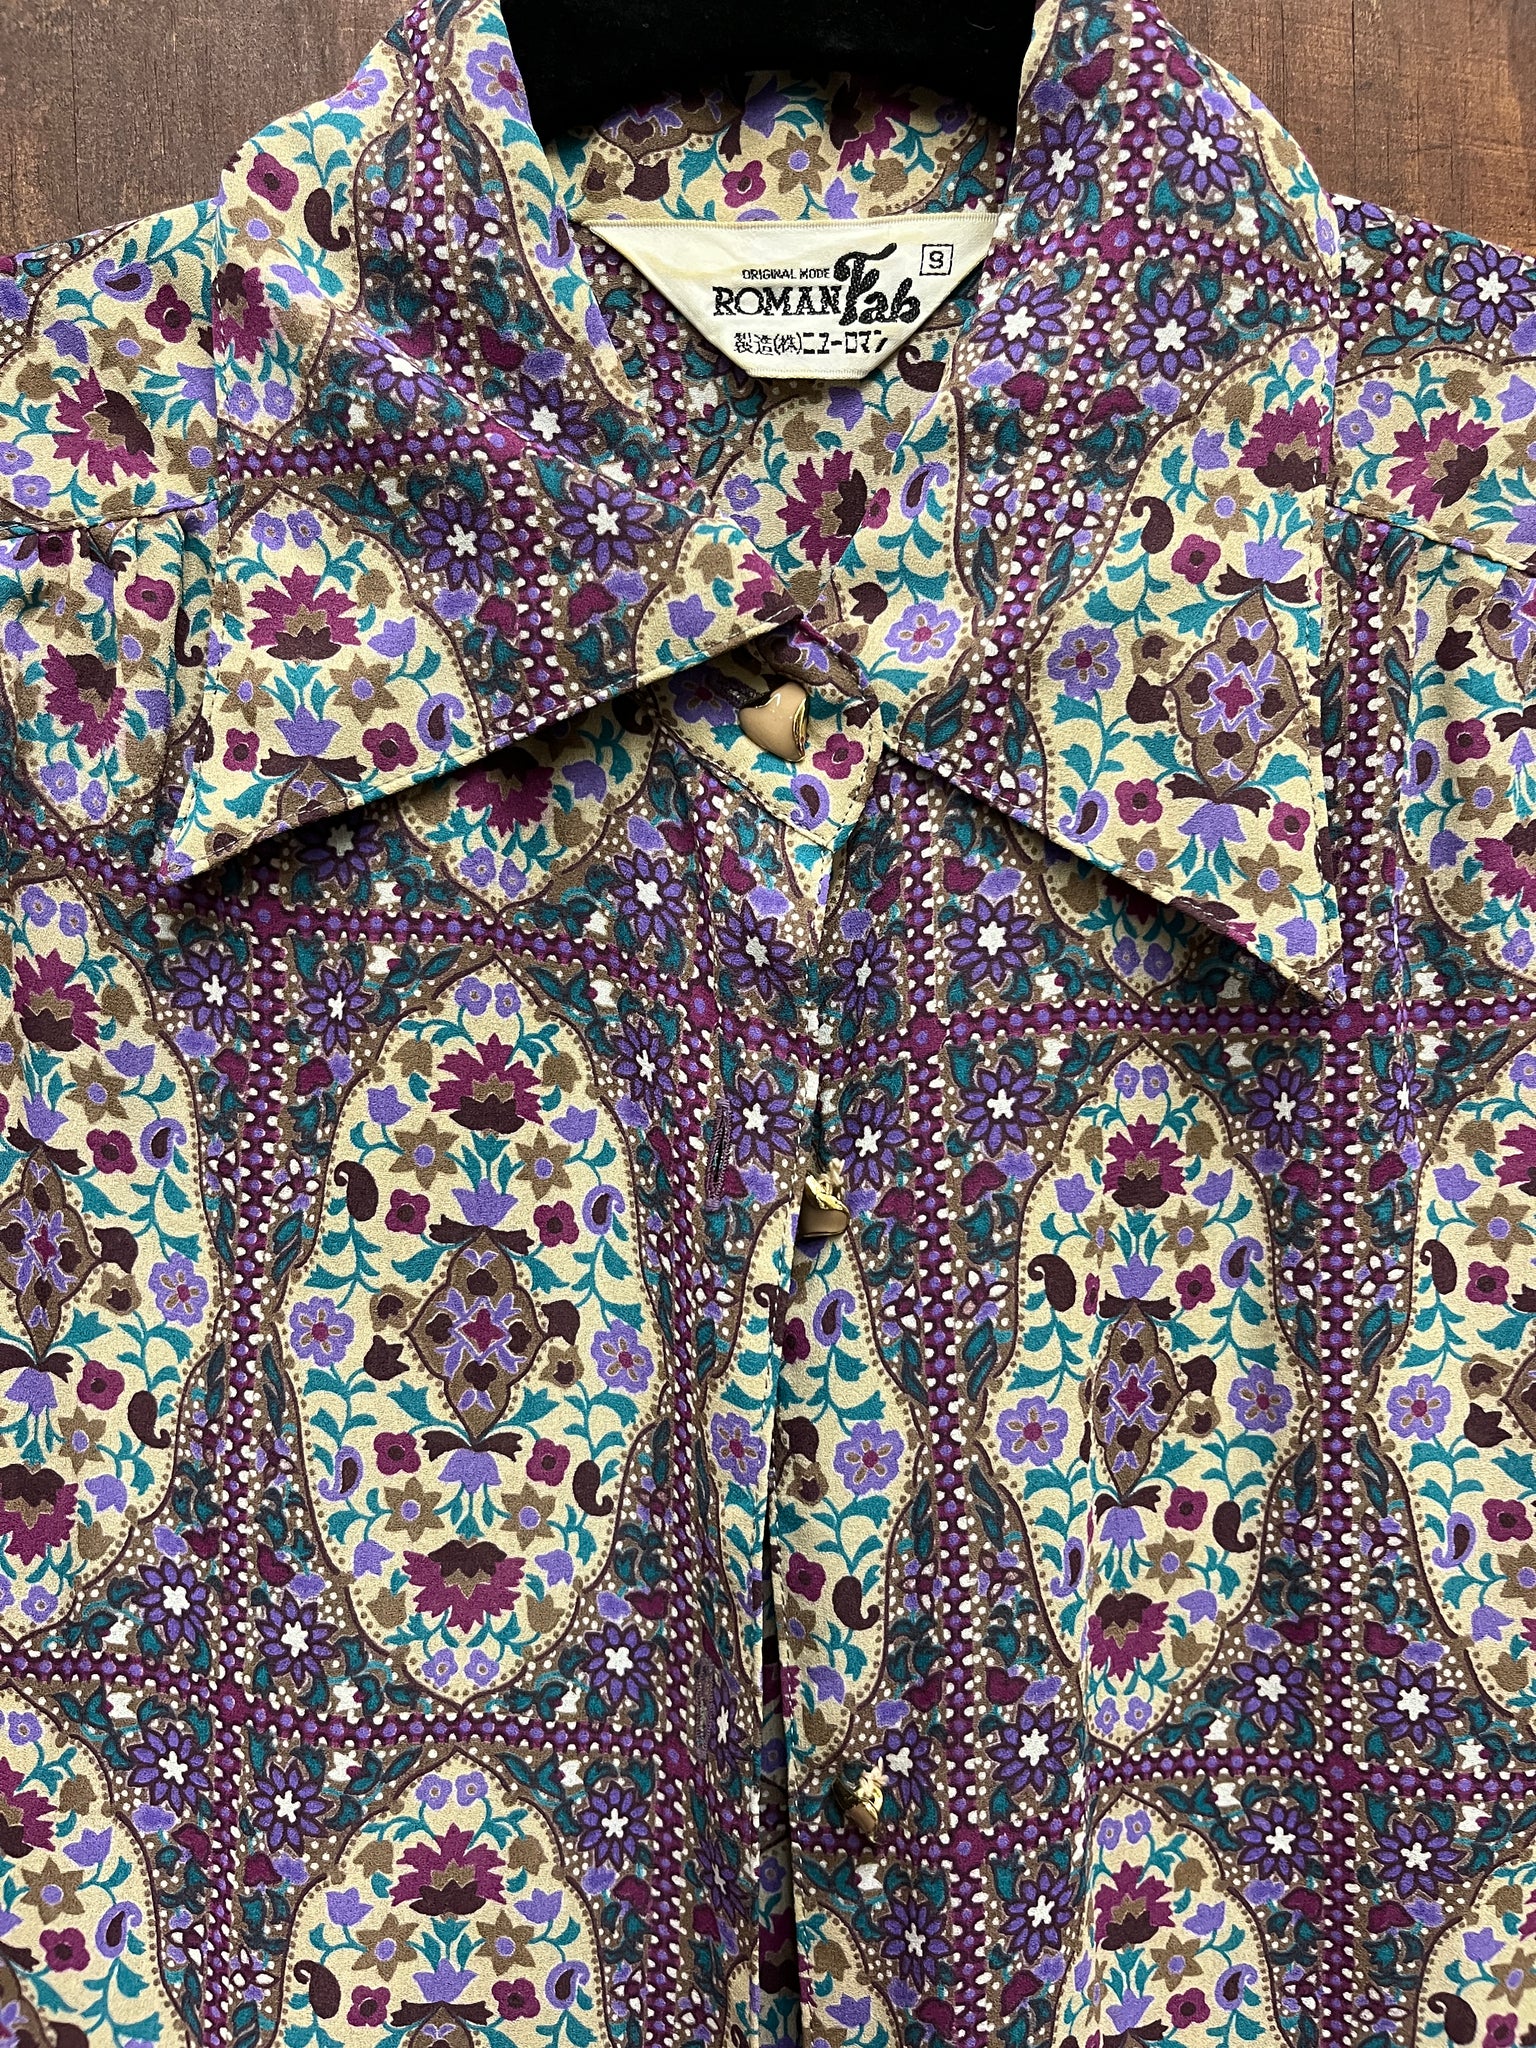 1970s TOP-Roman Fab-purple green taupe floral paisley pearl heart button up